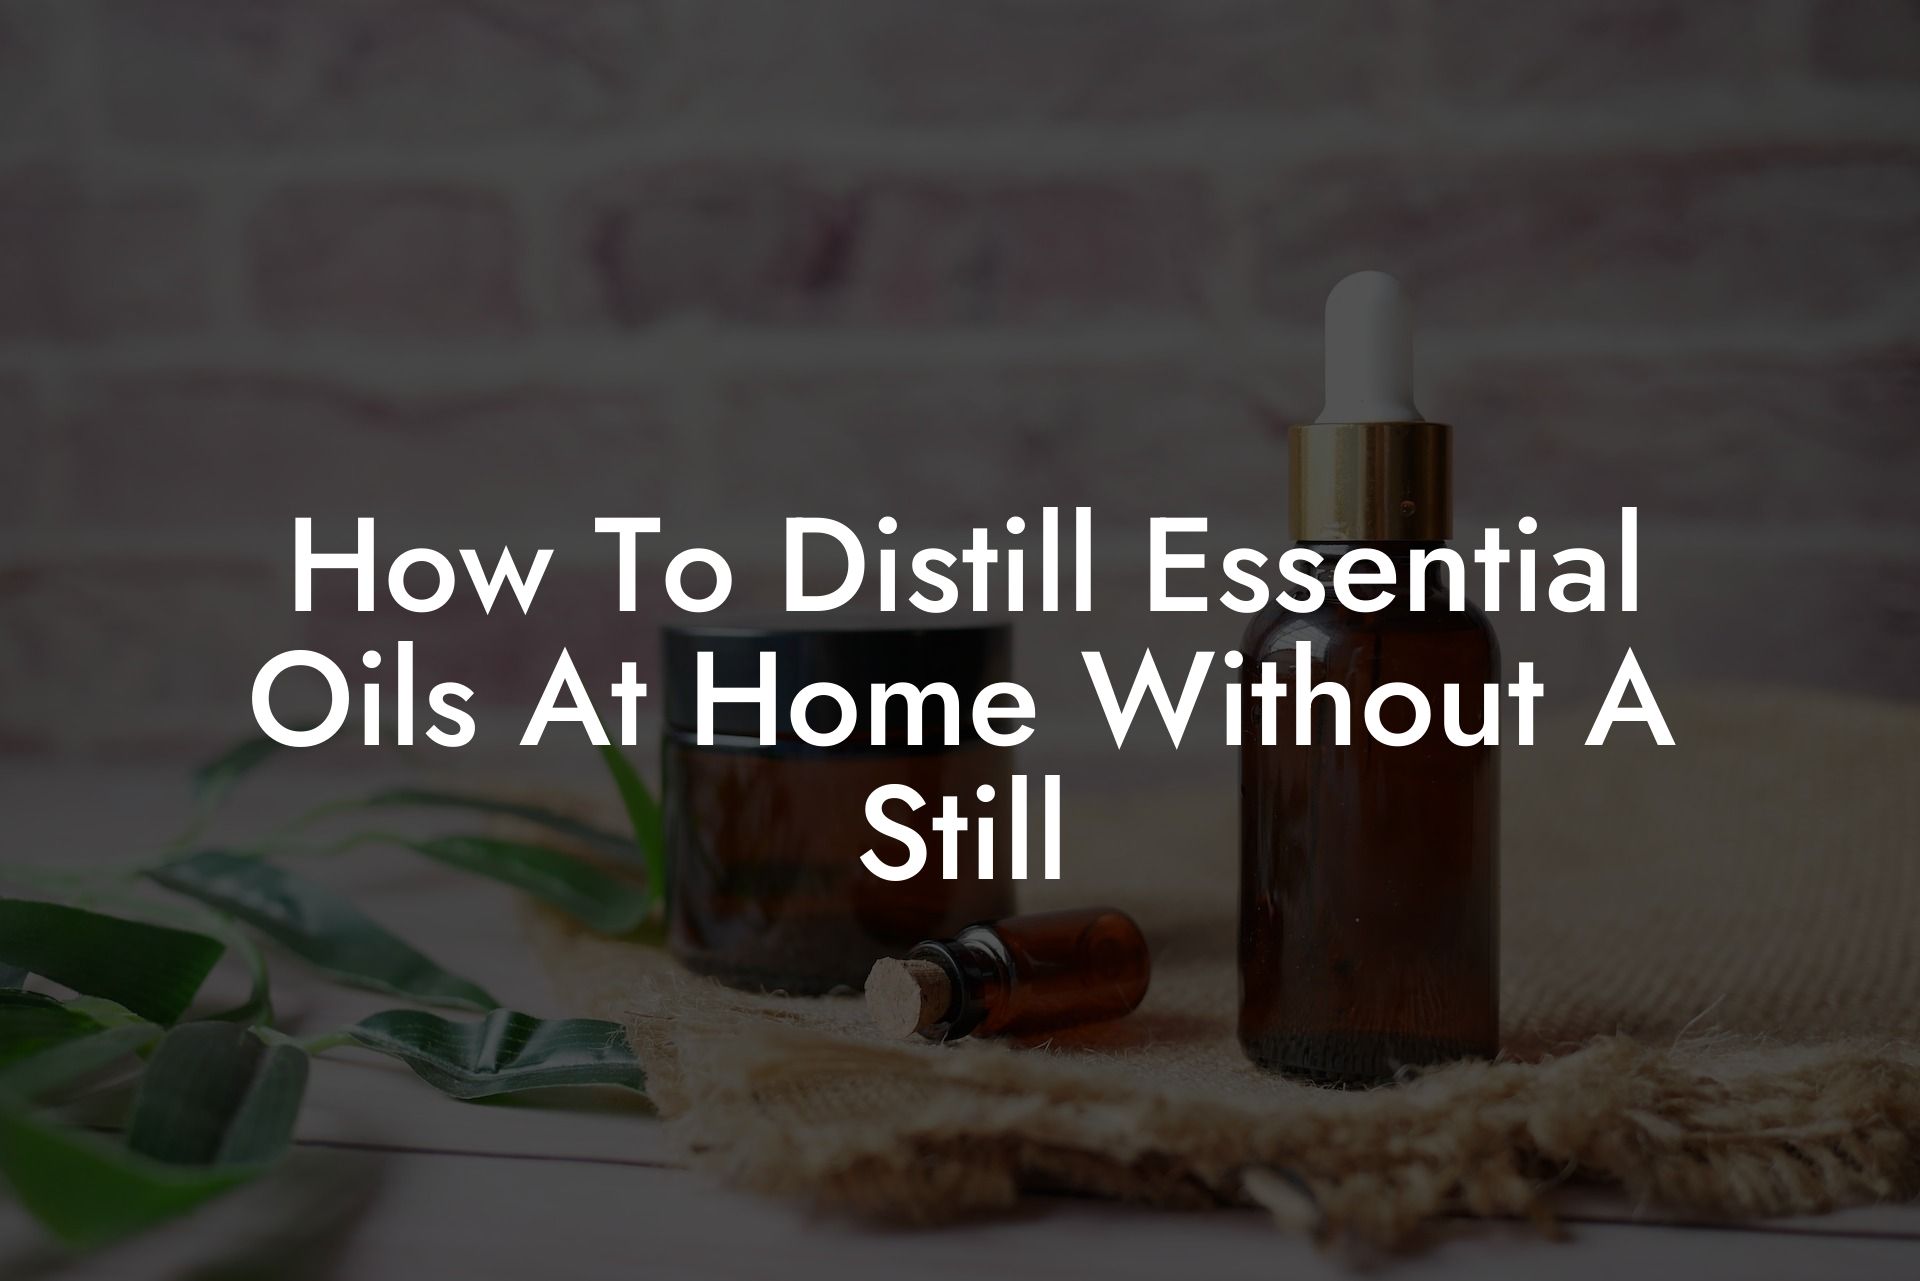 How To Distill Essential Oils At Home Without A Still